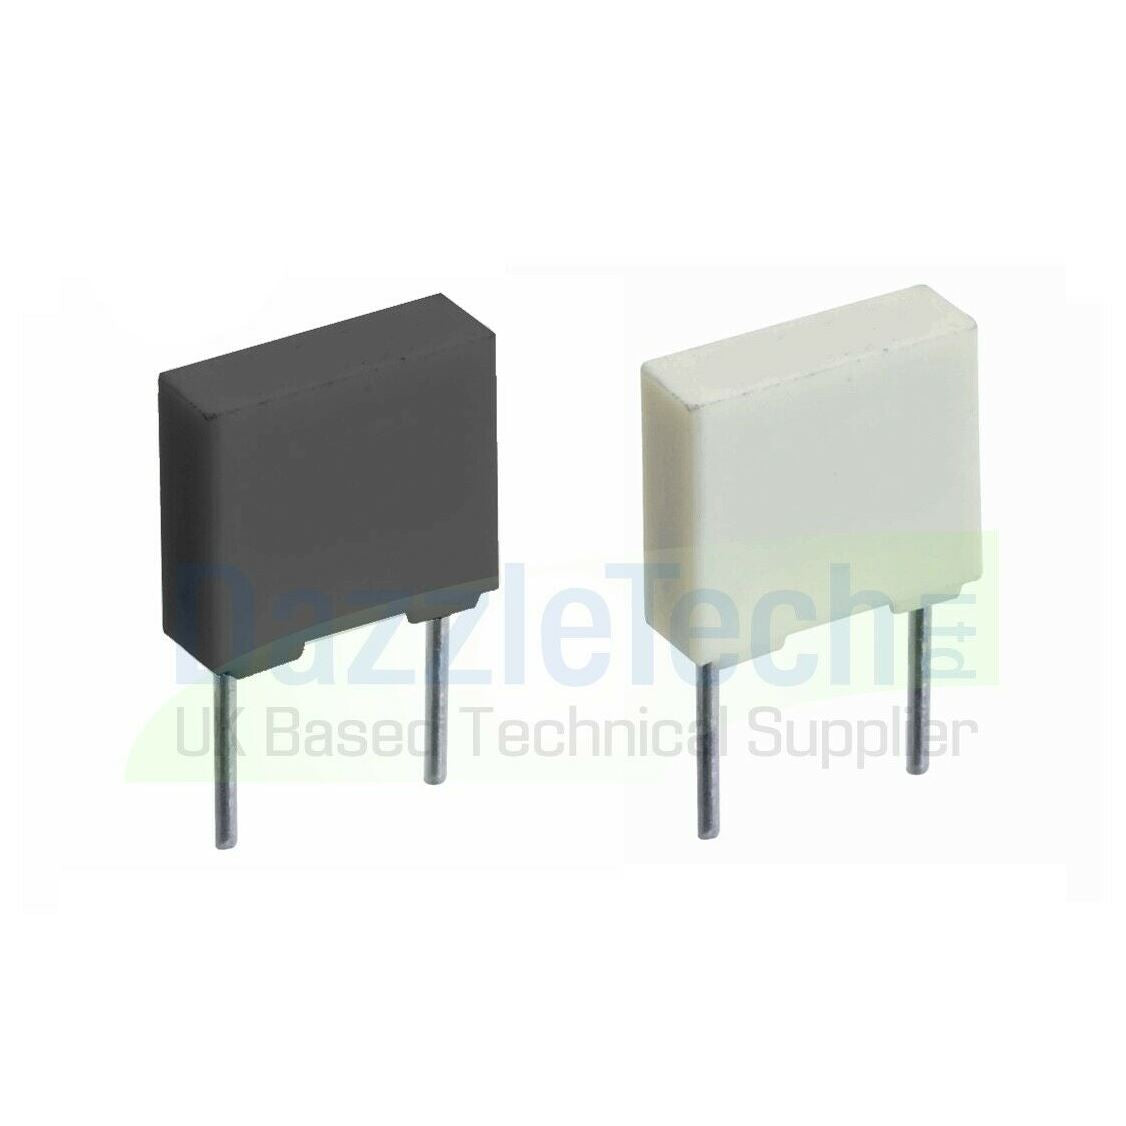 100 x Polyester Film Poly Box Capacitor Miniature R82